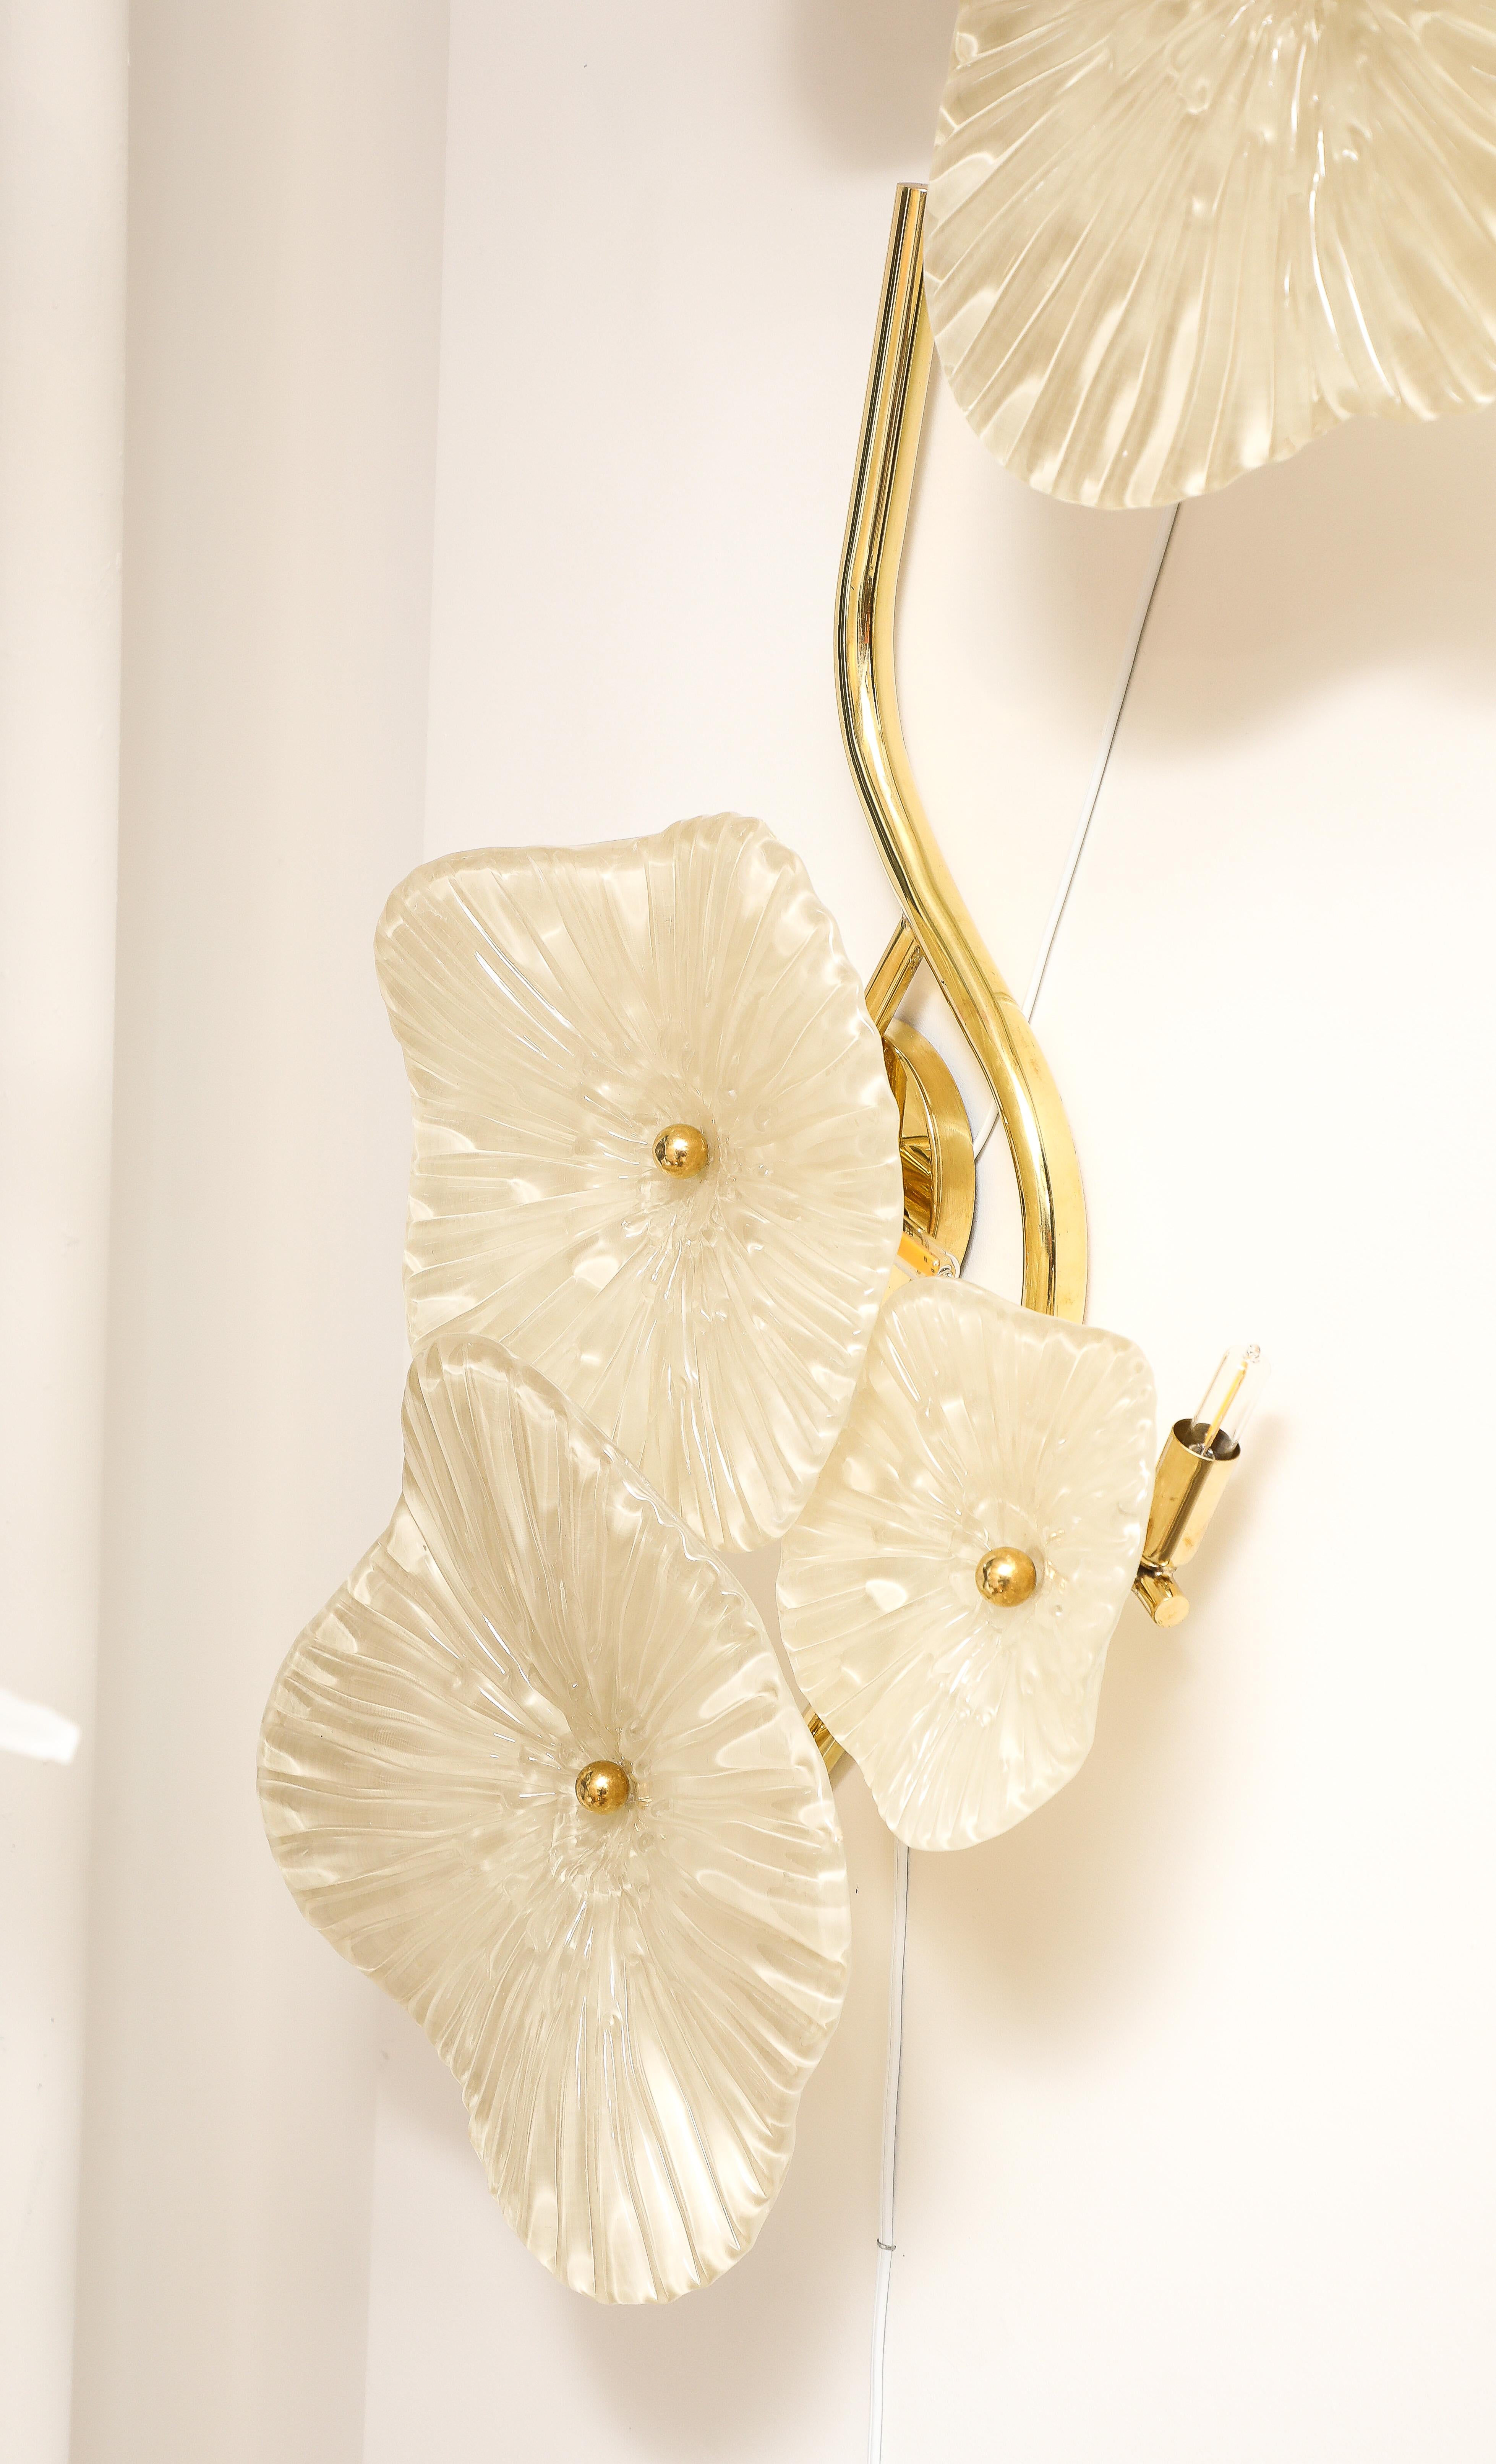 Pair of soft Ivory Murano Glass flower sconce or wall art with brass frame. Hand-casted and formed Murano glass flowers in a delicate ivory color are attached with a brass caps to brass stems. The Murano glass flowers vary in size to give this wall